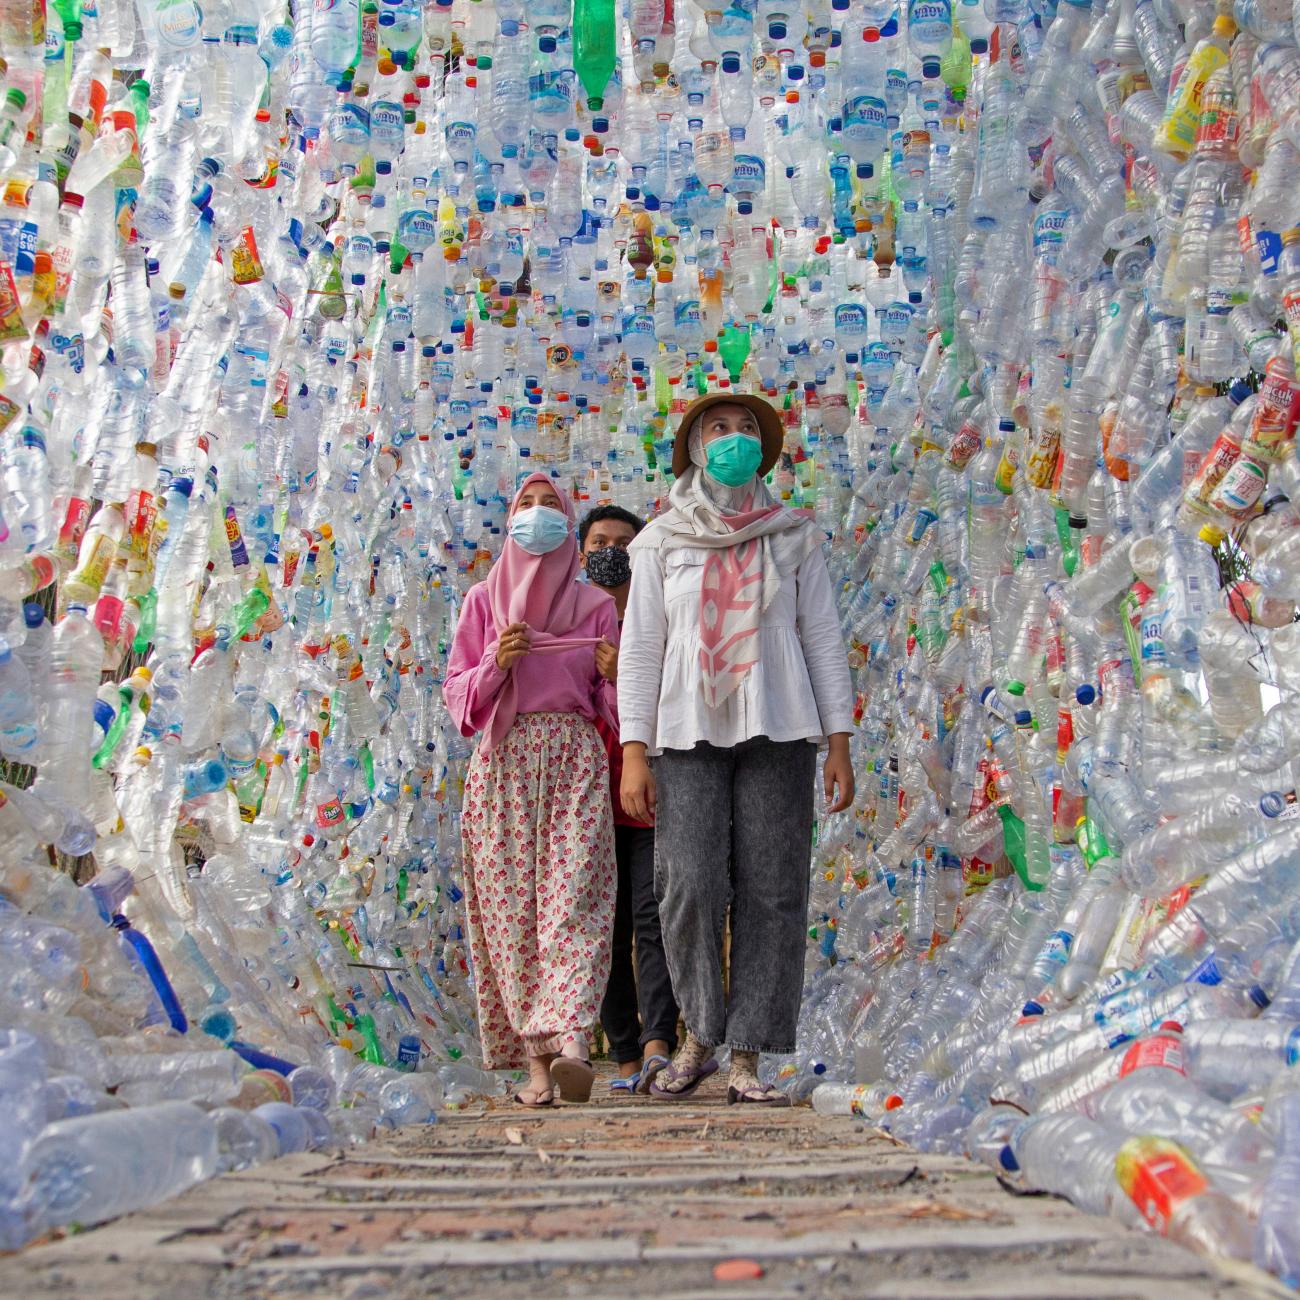 People walk through Terowongan 4444, built from plastic bottles collected from several rivers around the city in three years, constructed by an Indonesian environmental activist group.